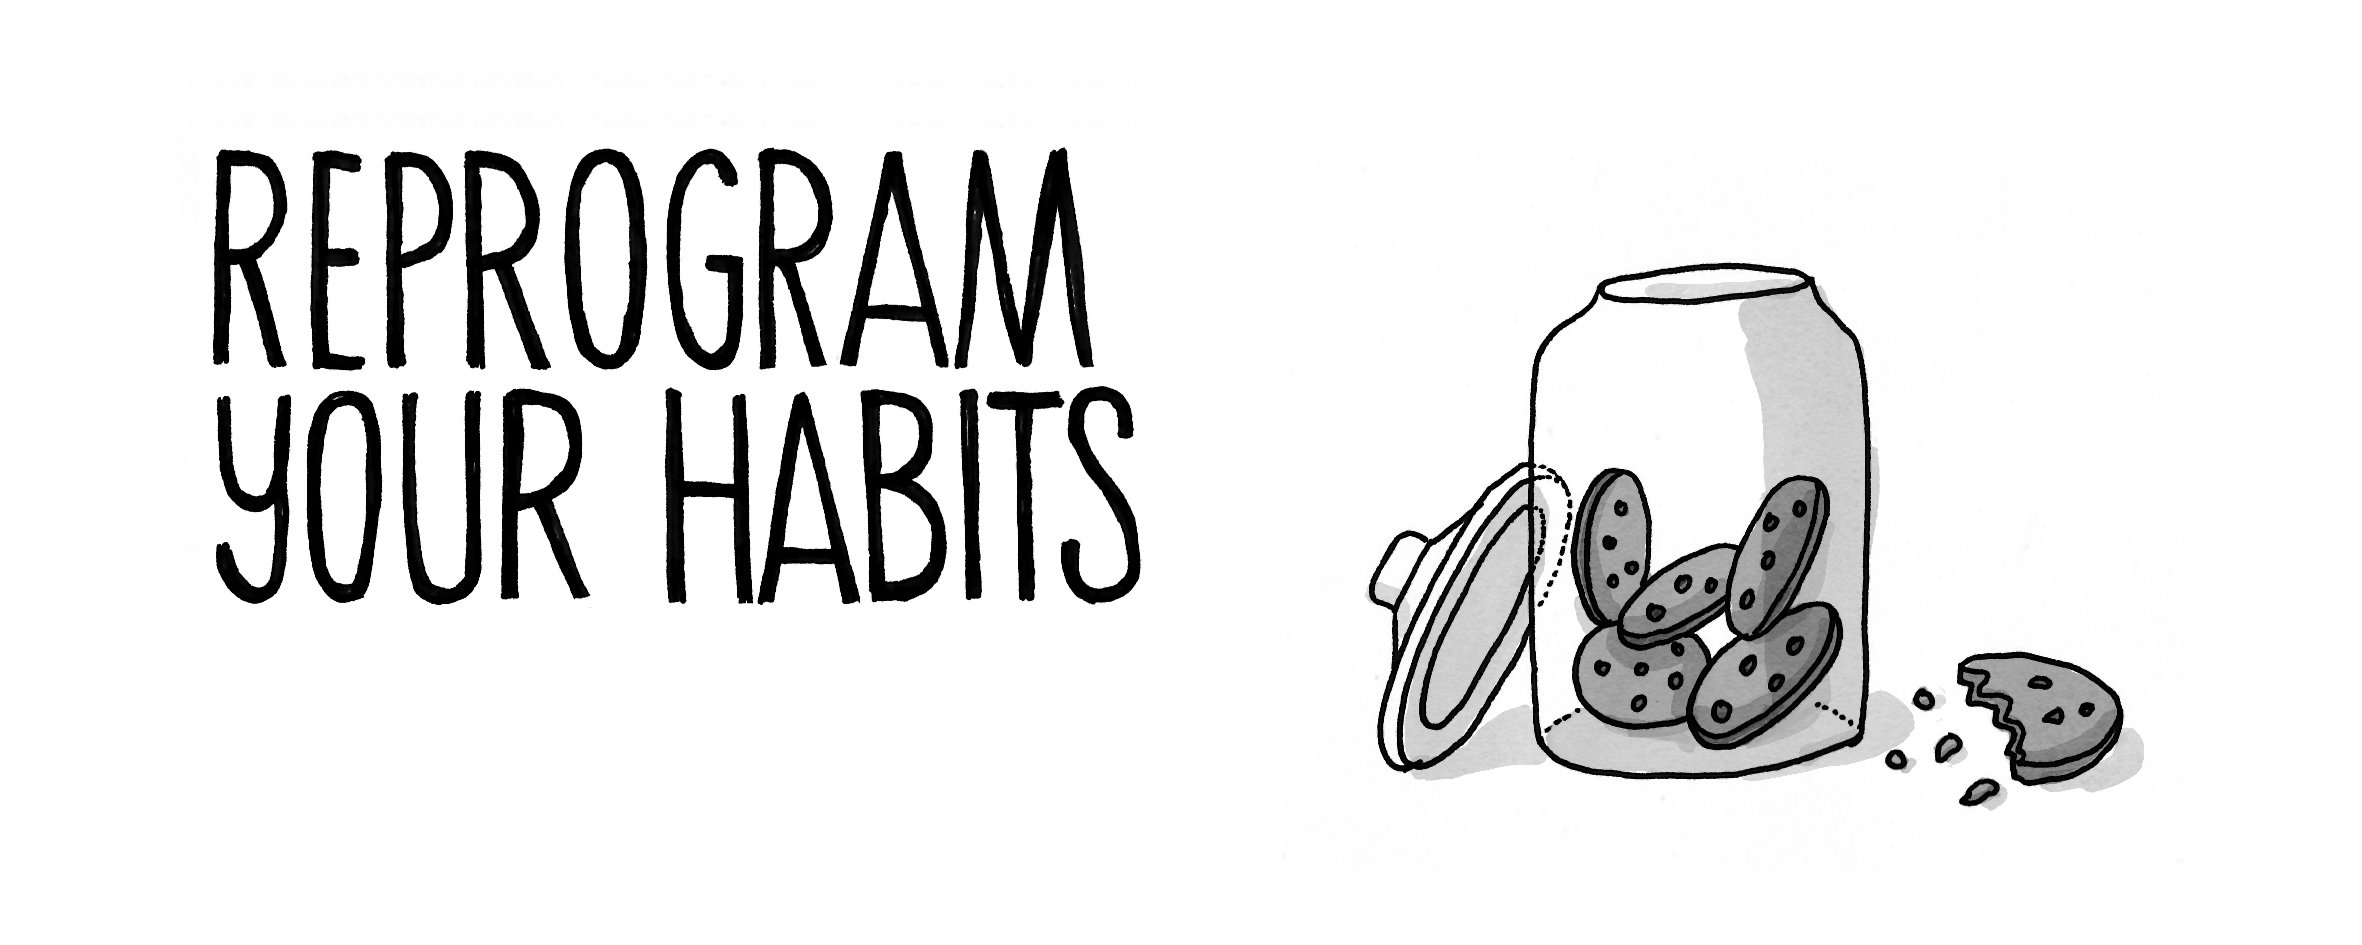 claire-turnbull-planner-illustration-reprogram-your-habits-by-creative-people